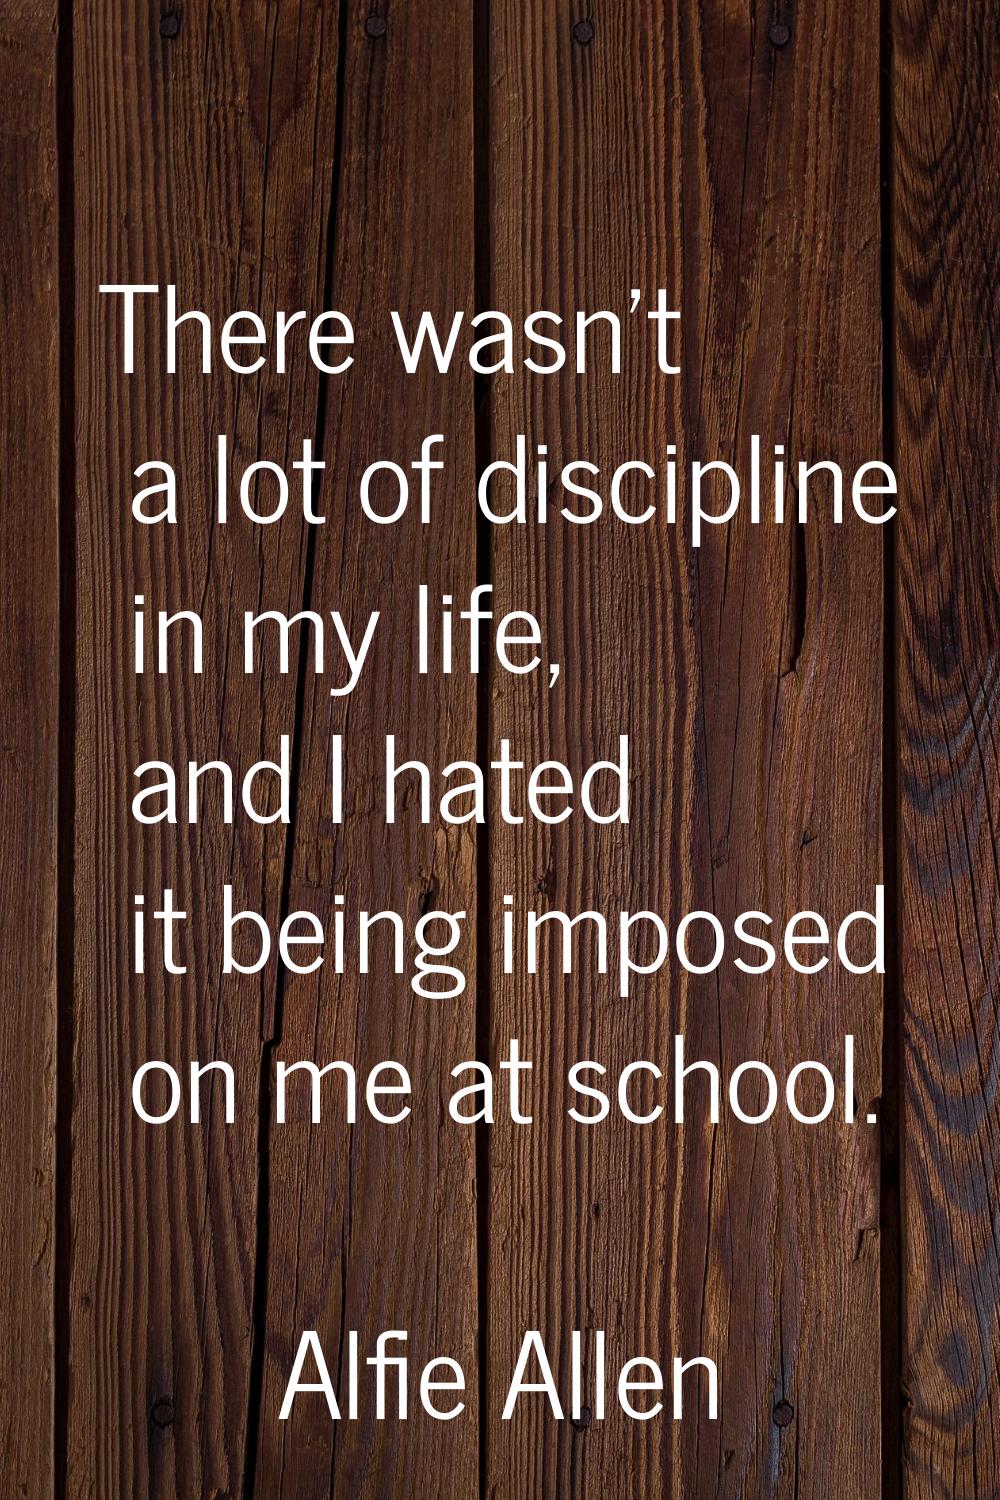 There wasn't a lot of discipline in my life, and I hated it being imposed on me at school.